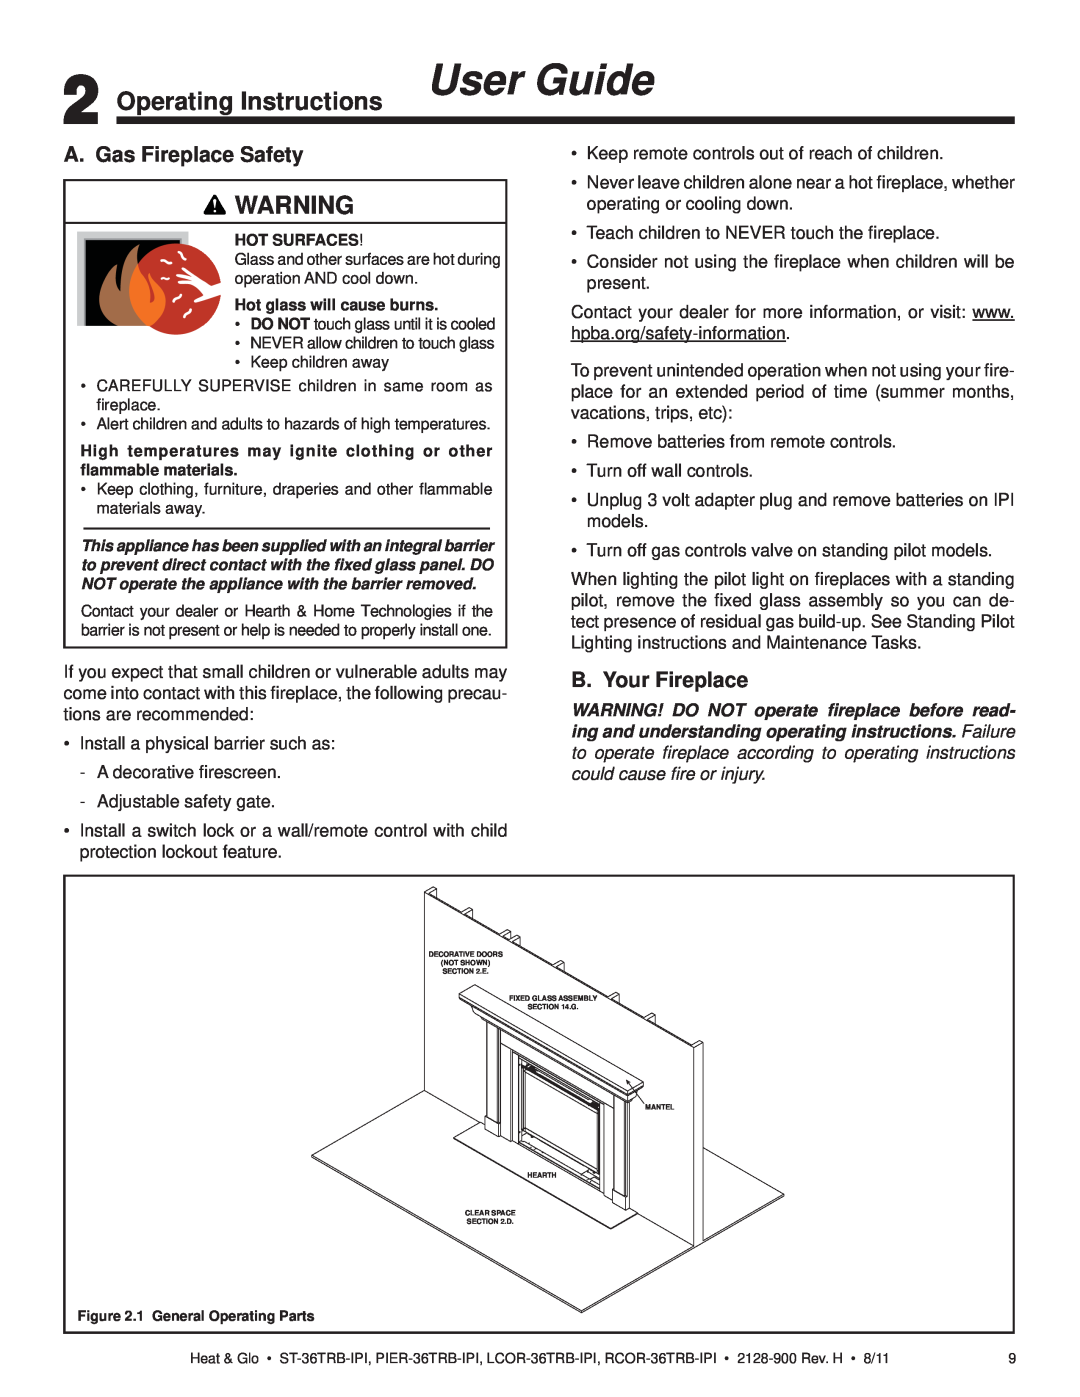 Heat & Glo LifeStyle ST-36TRB-IPI Operating Instructions User Guide, A. Gas Fireplace Safety, B. Your Fireplace 